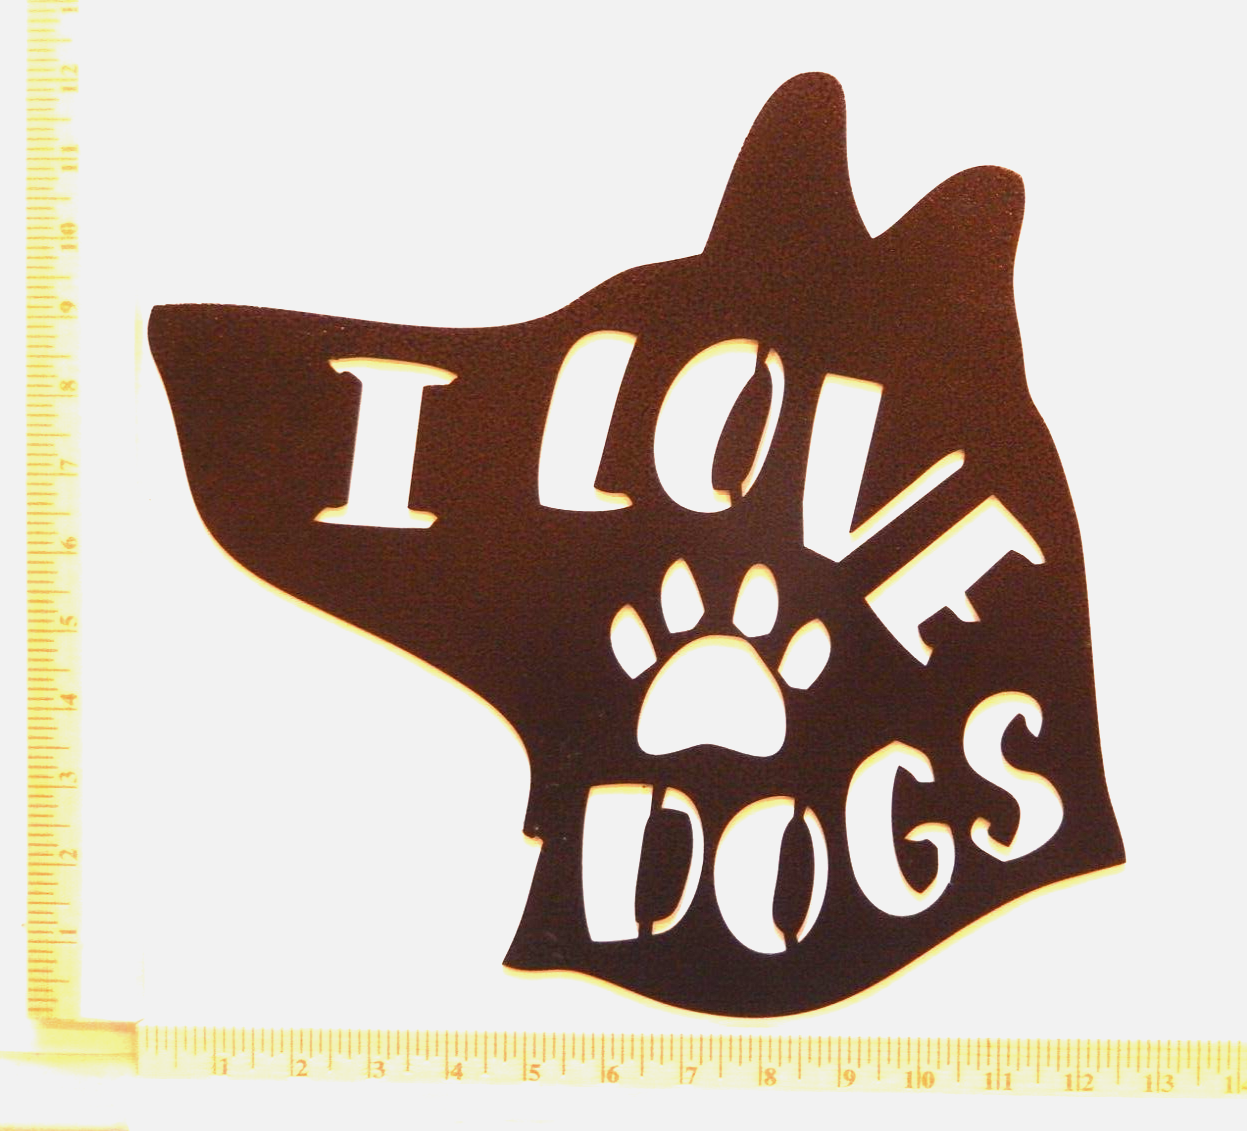 "I LOVE DOGS" 14 gauge thick Powder Coated Copper Tone Metal Wall Art 12"x12